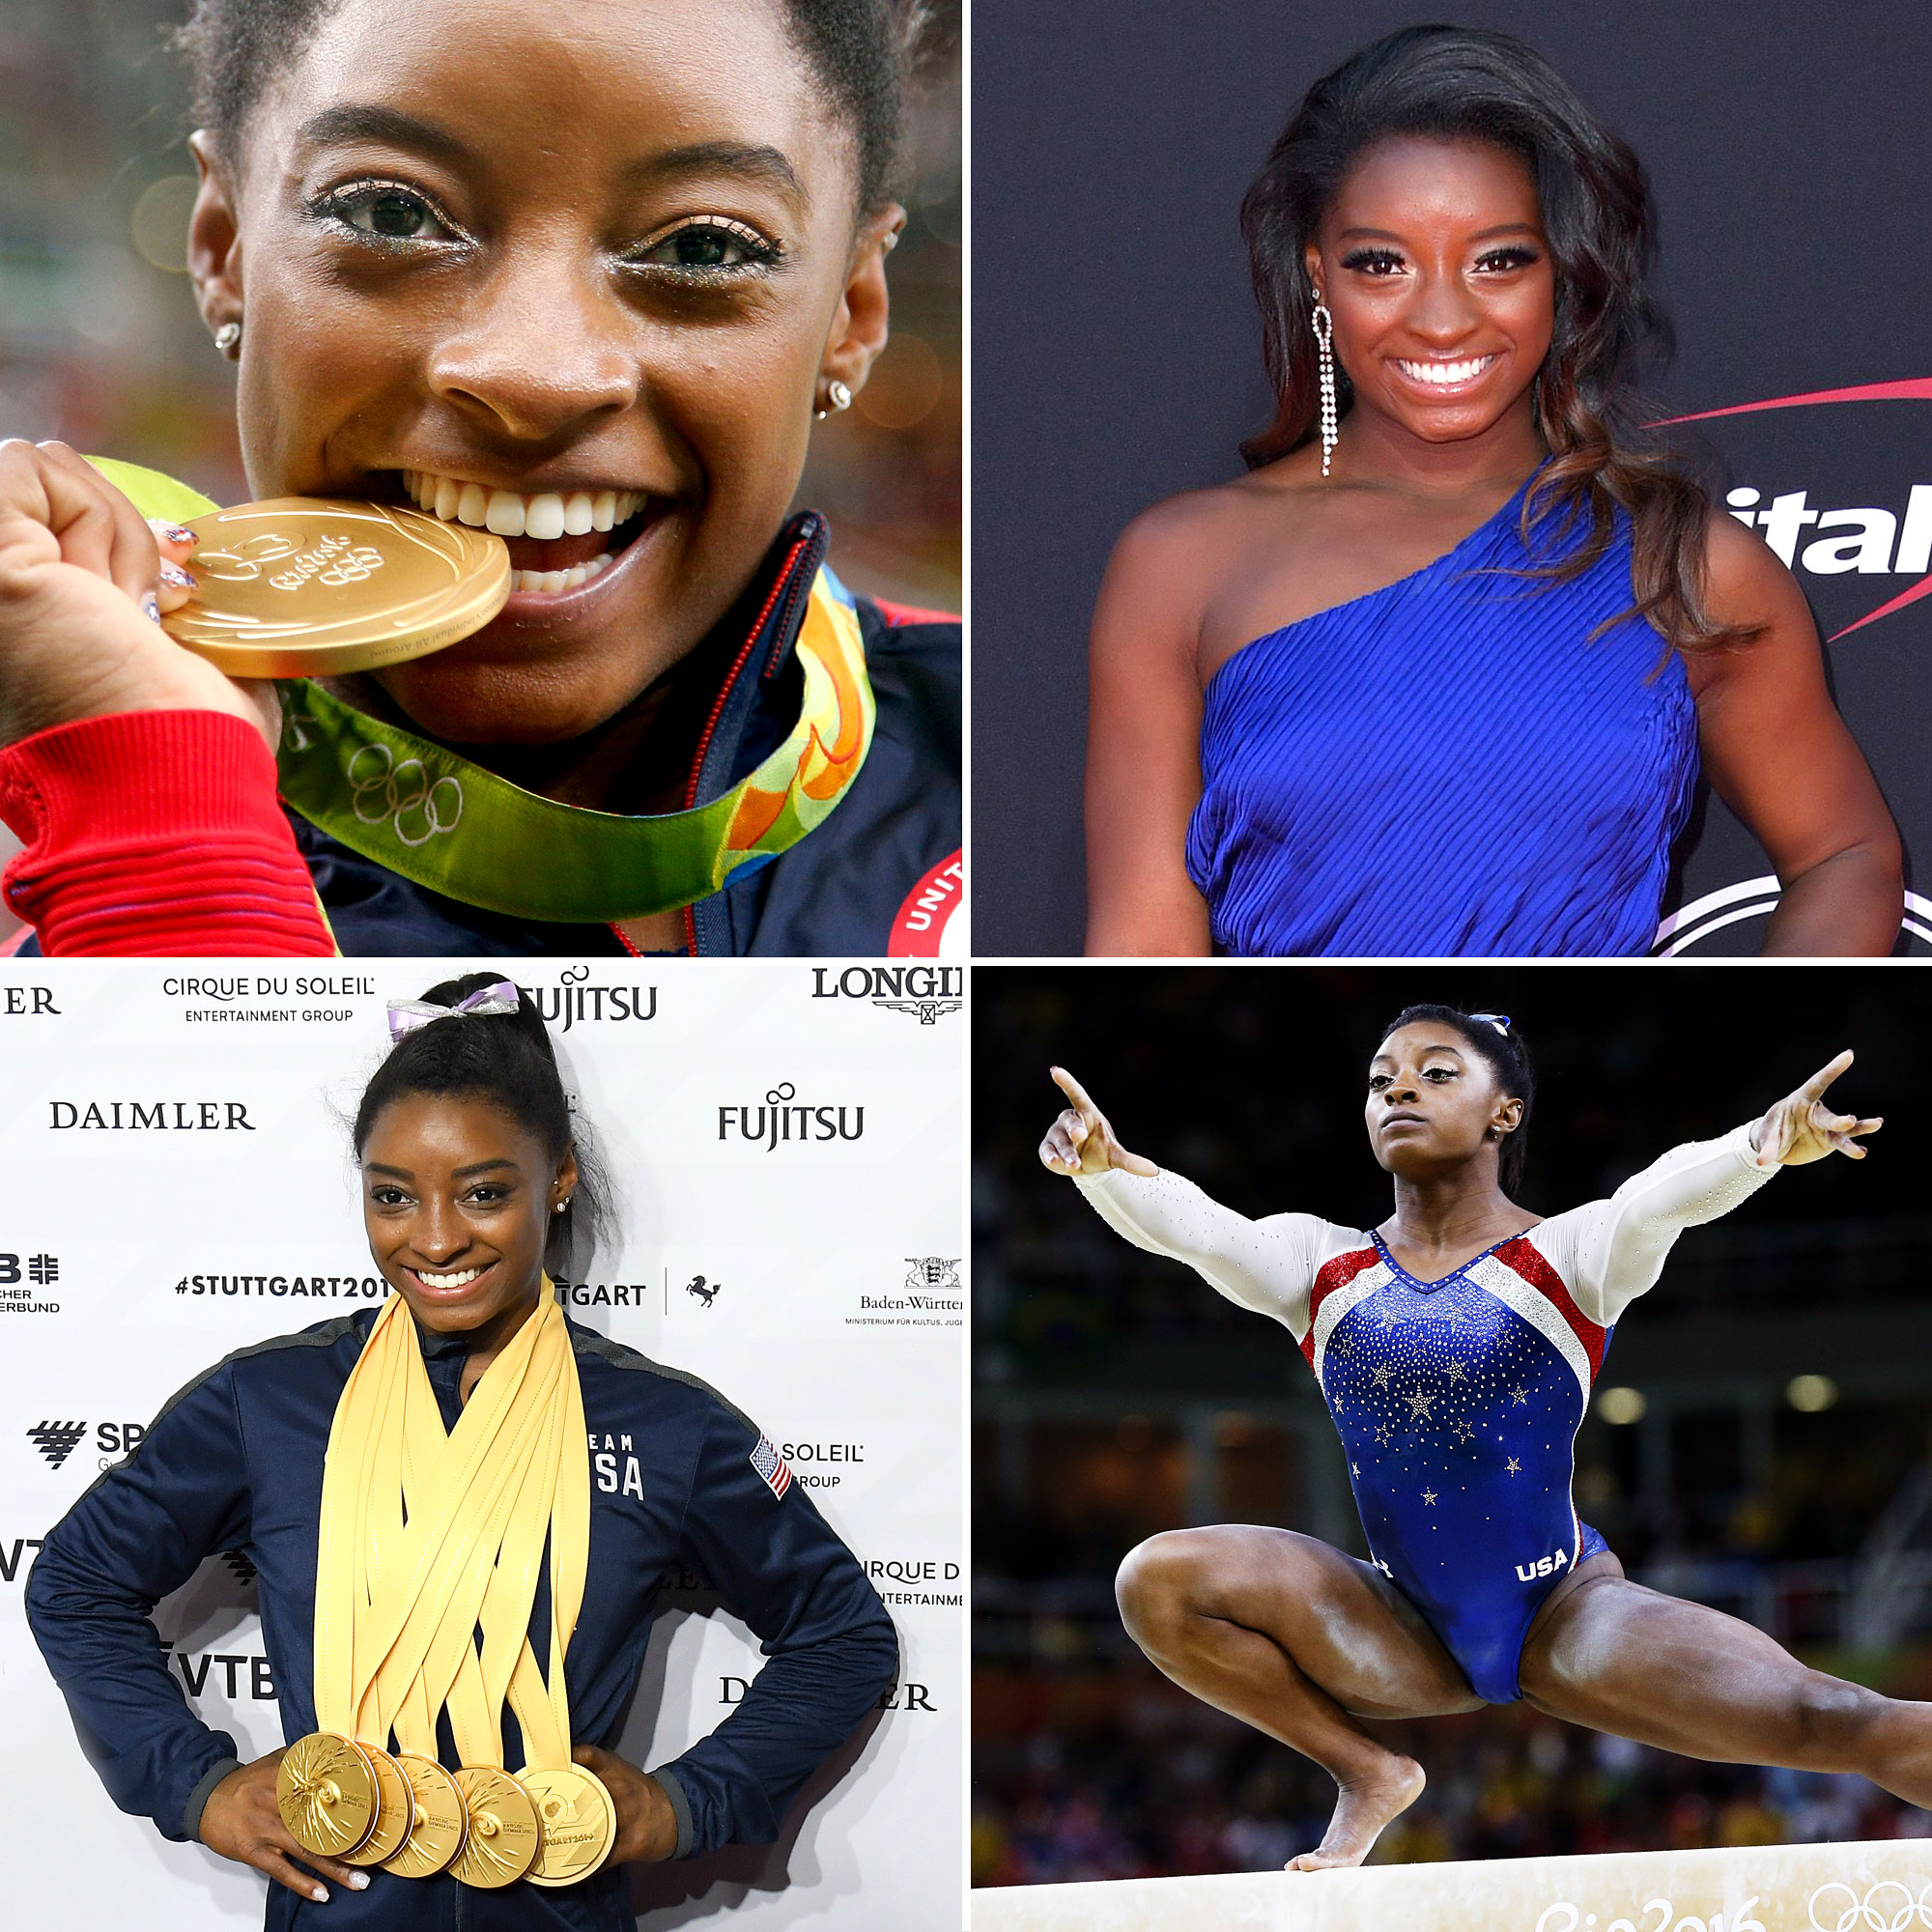 Simone Biles  Biography, Competitions, Wins and Medals